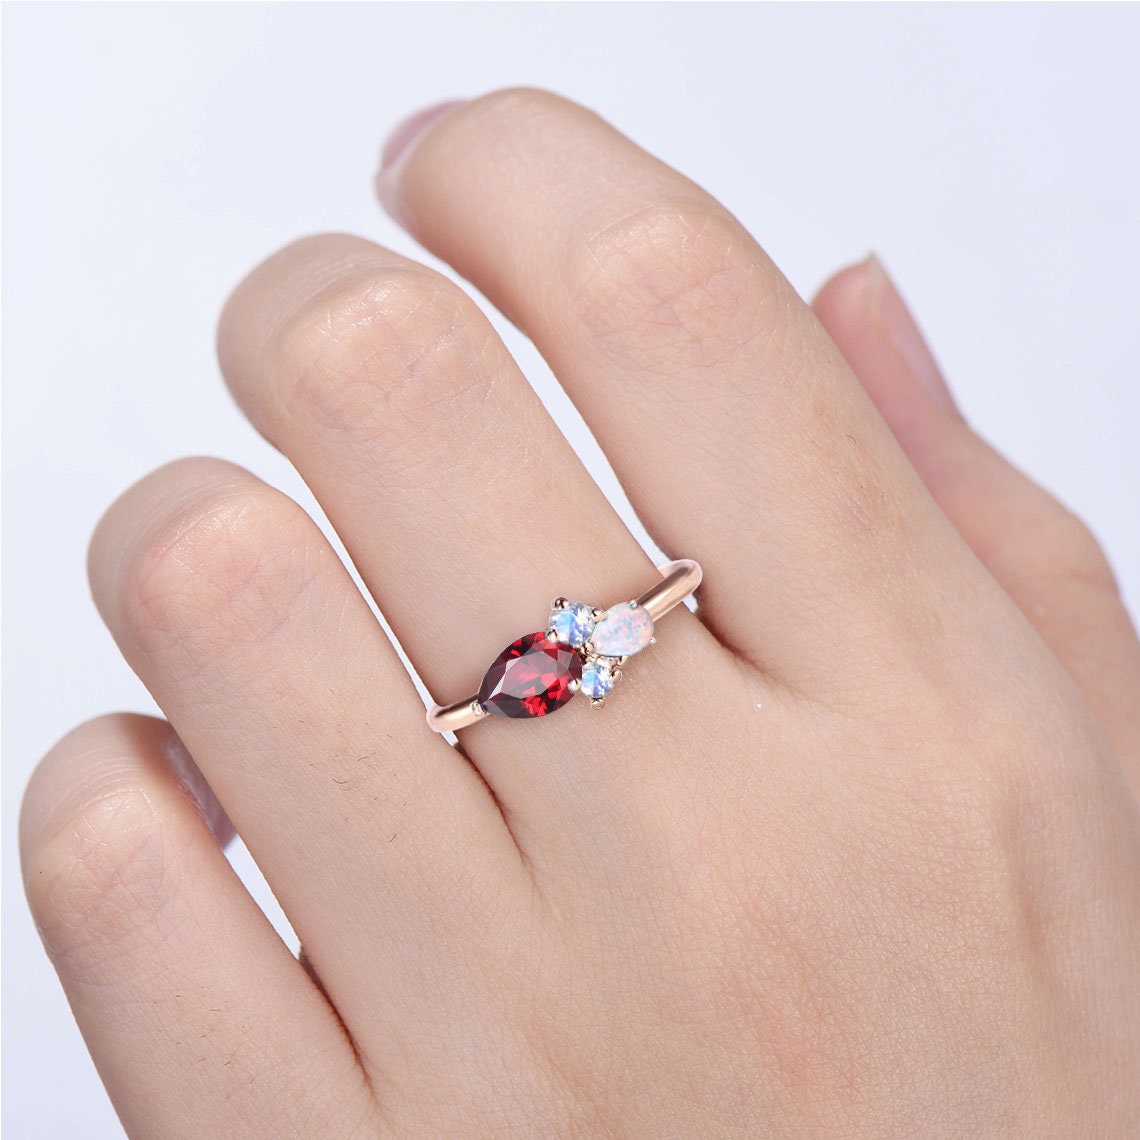 Handmade Pear Cut Red Ruby Ring 10K Rose Gold July Birthstone Promise Ring Vintage Cluster Moonstone Opal Ring Personalized Birthday Gifts